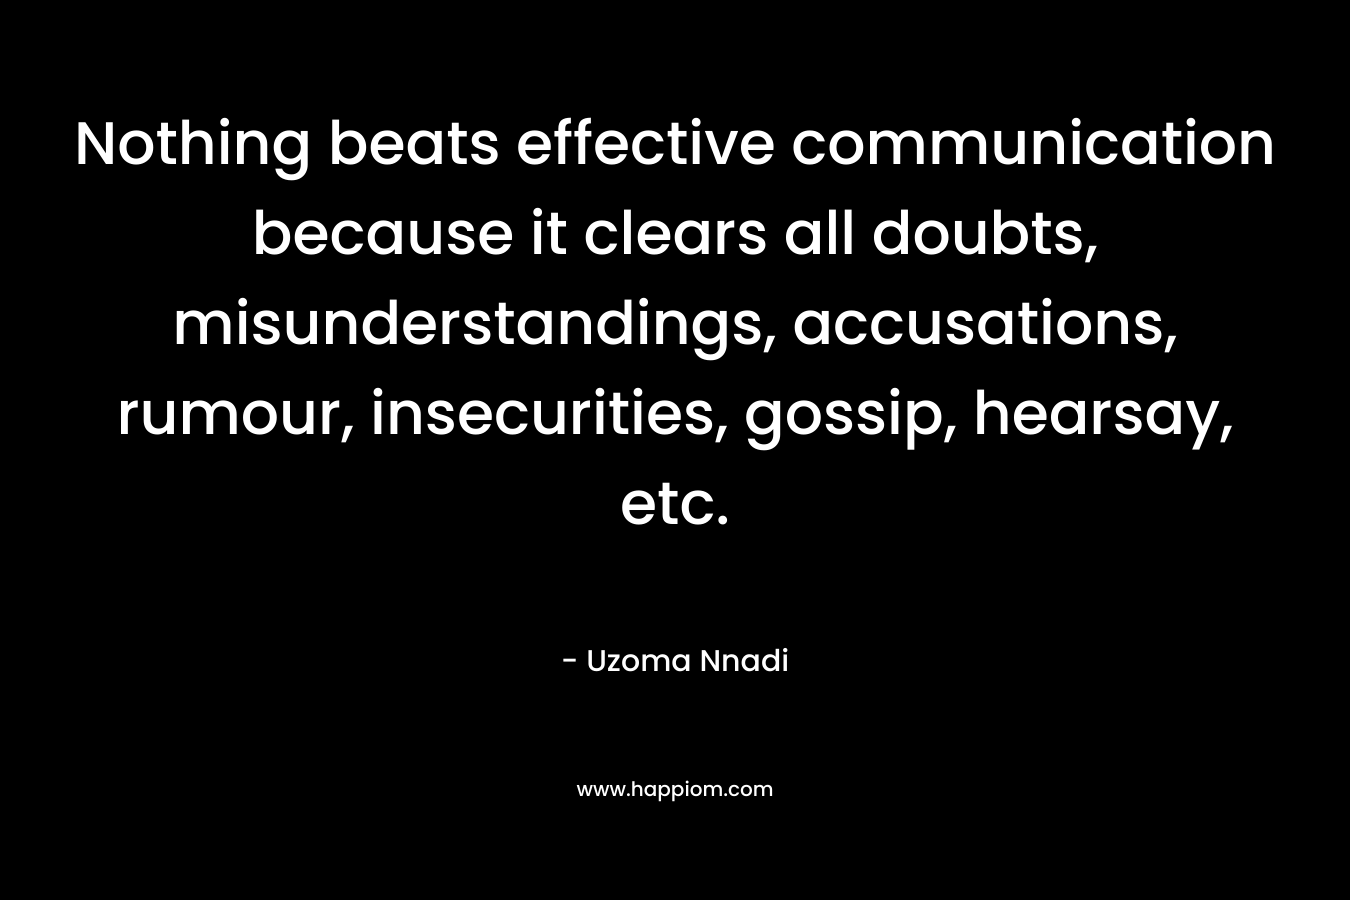 Nothing beats effective communication because it clears all doubts, misunderstandings, accusations, rumour, insecurities, gossip, hearsay, etc. – Uzoma Nnadi